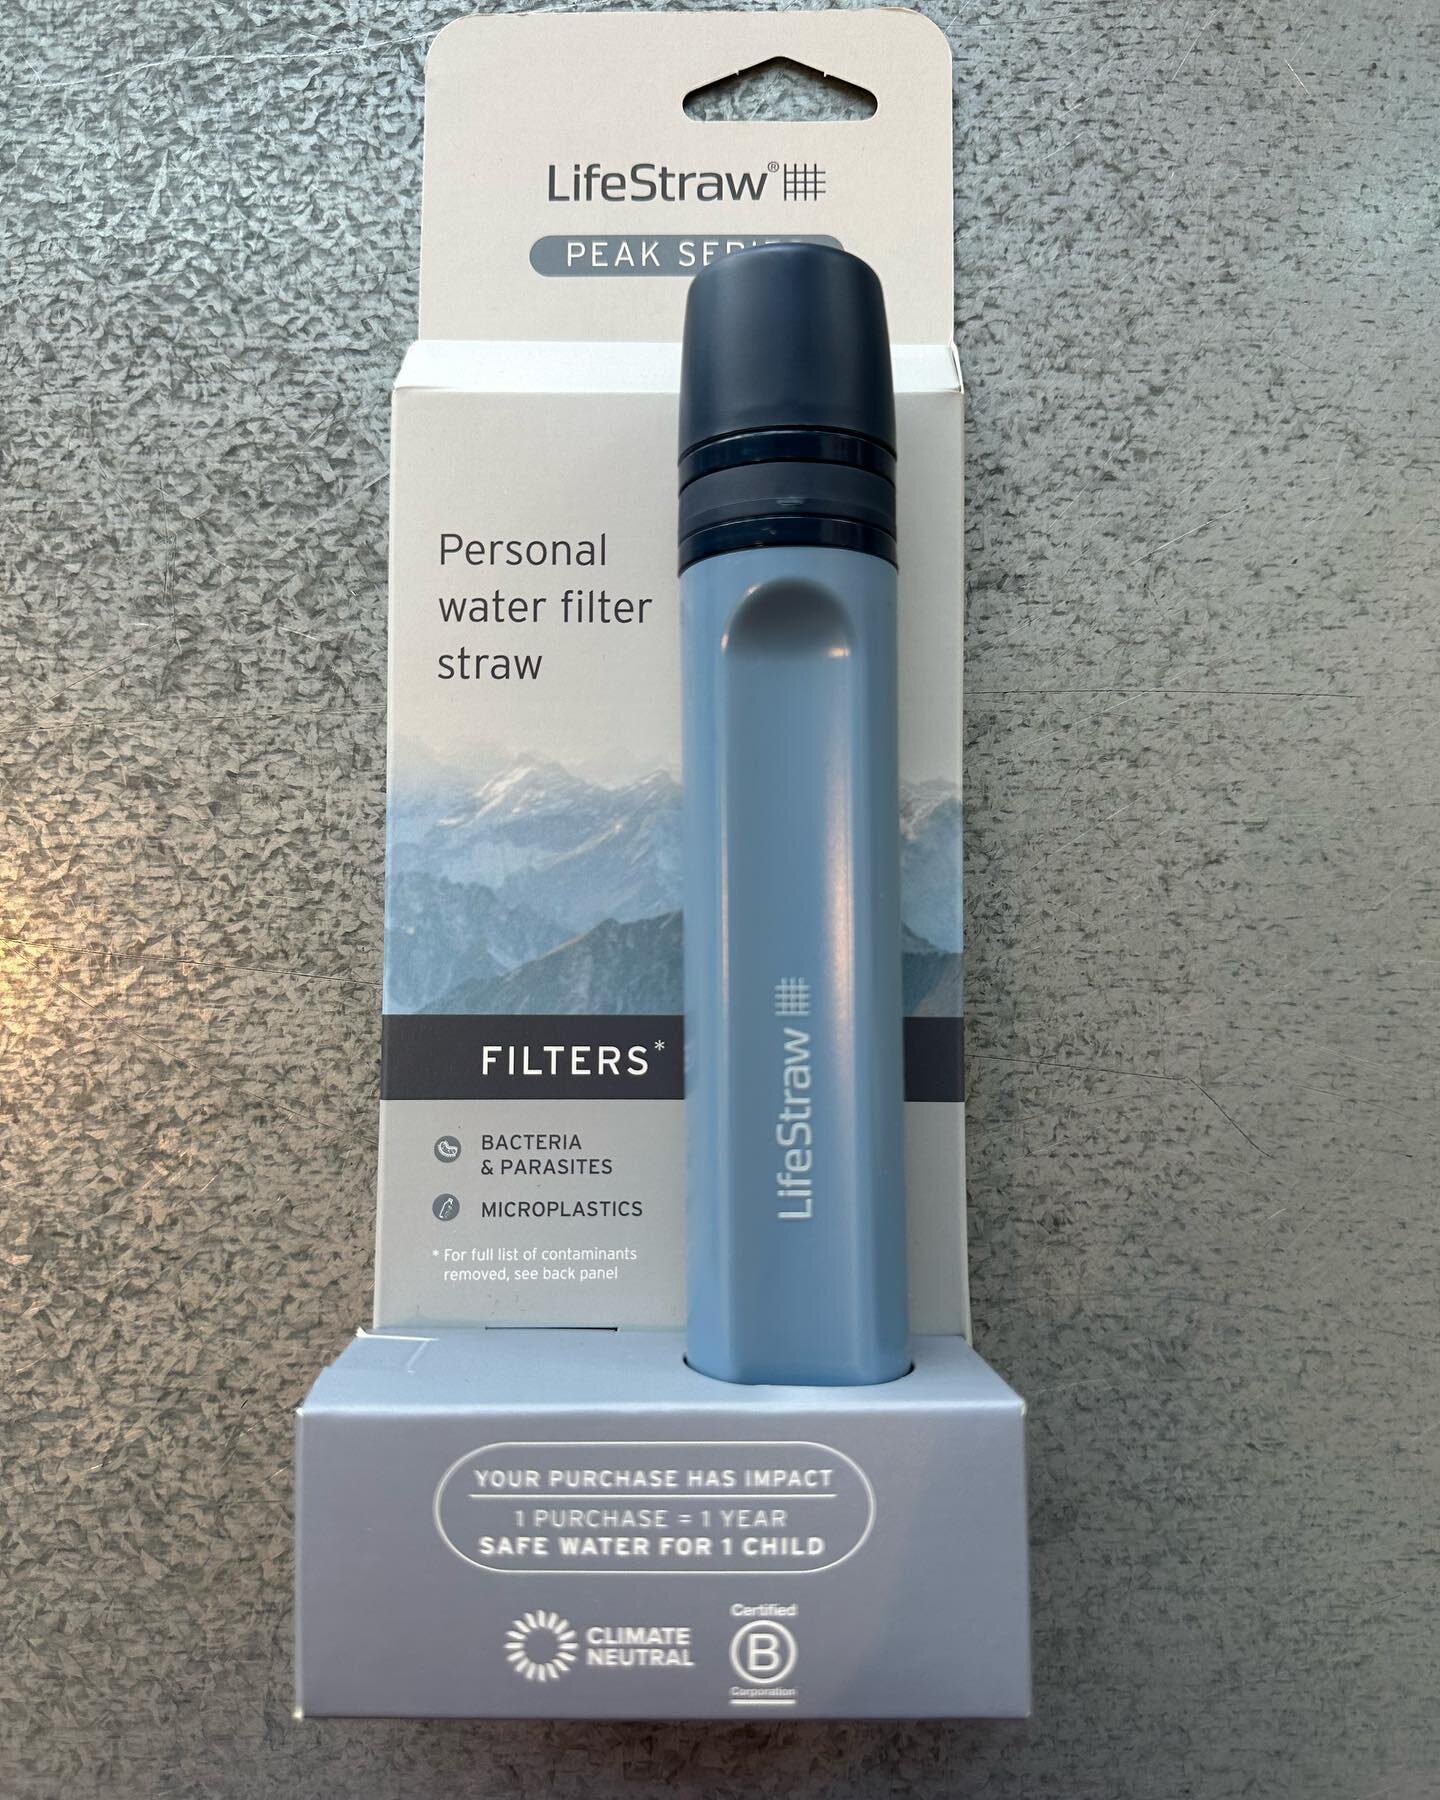 They&rsquo;re here!! @lifestraw #mysthelena #sthelenaca #downtownsthelena
#sportago #shoplocal #napavalley #hiking #napavalleylife #travel #lifestraw #camping #waterfilter